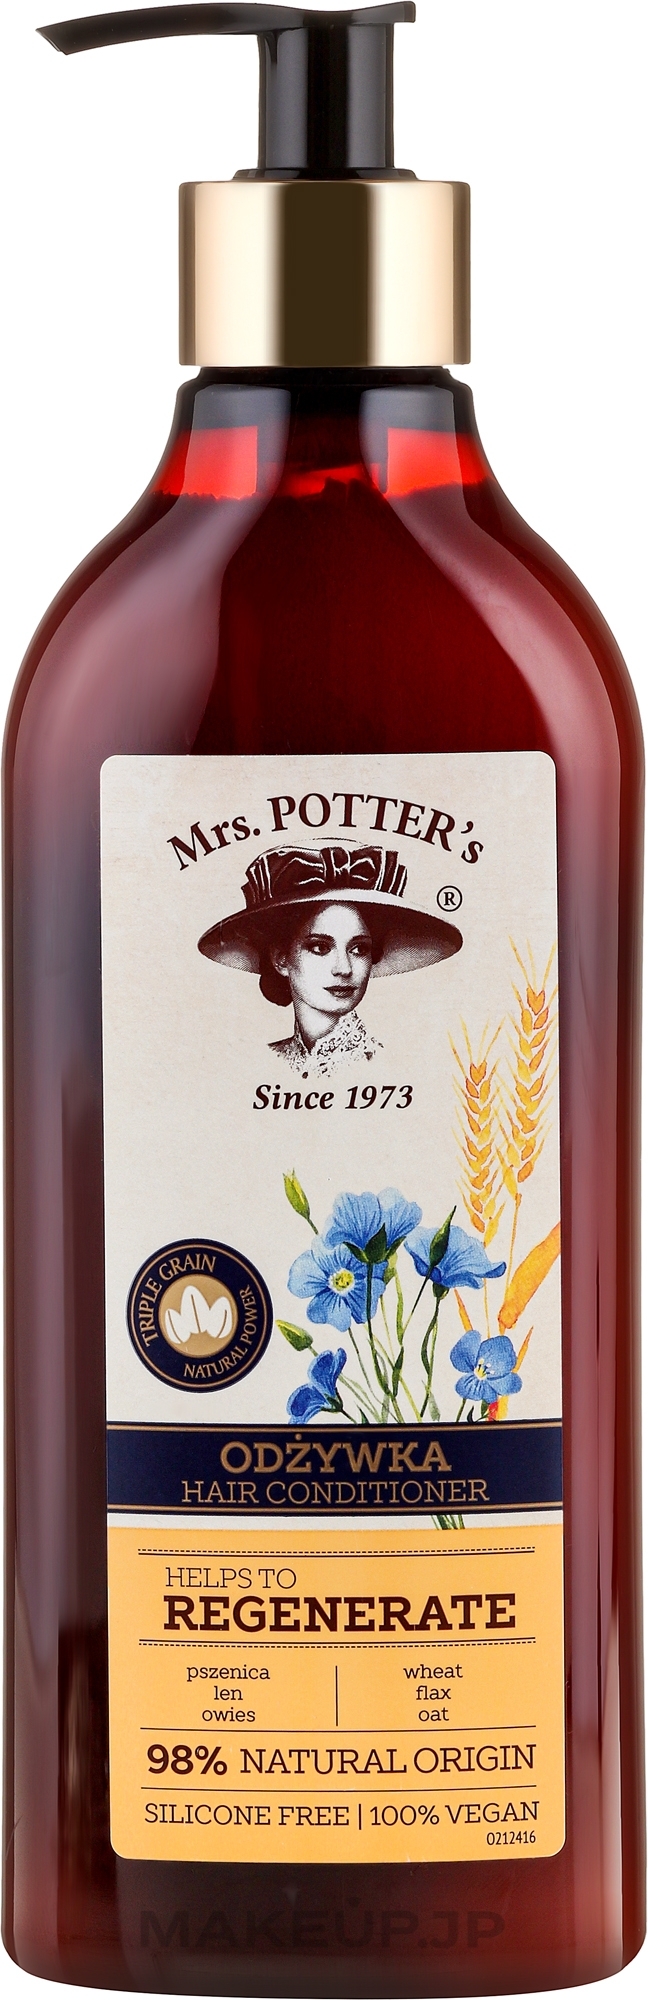 Hair Conditioner - Mrs. Potter's Helps To Regenerate Hair Conditioner — photo 390 ml